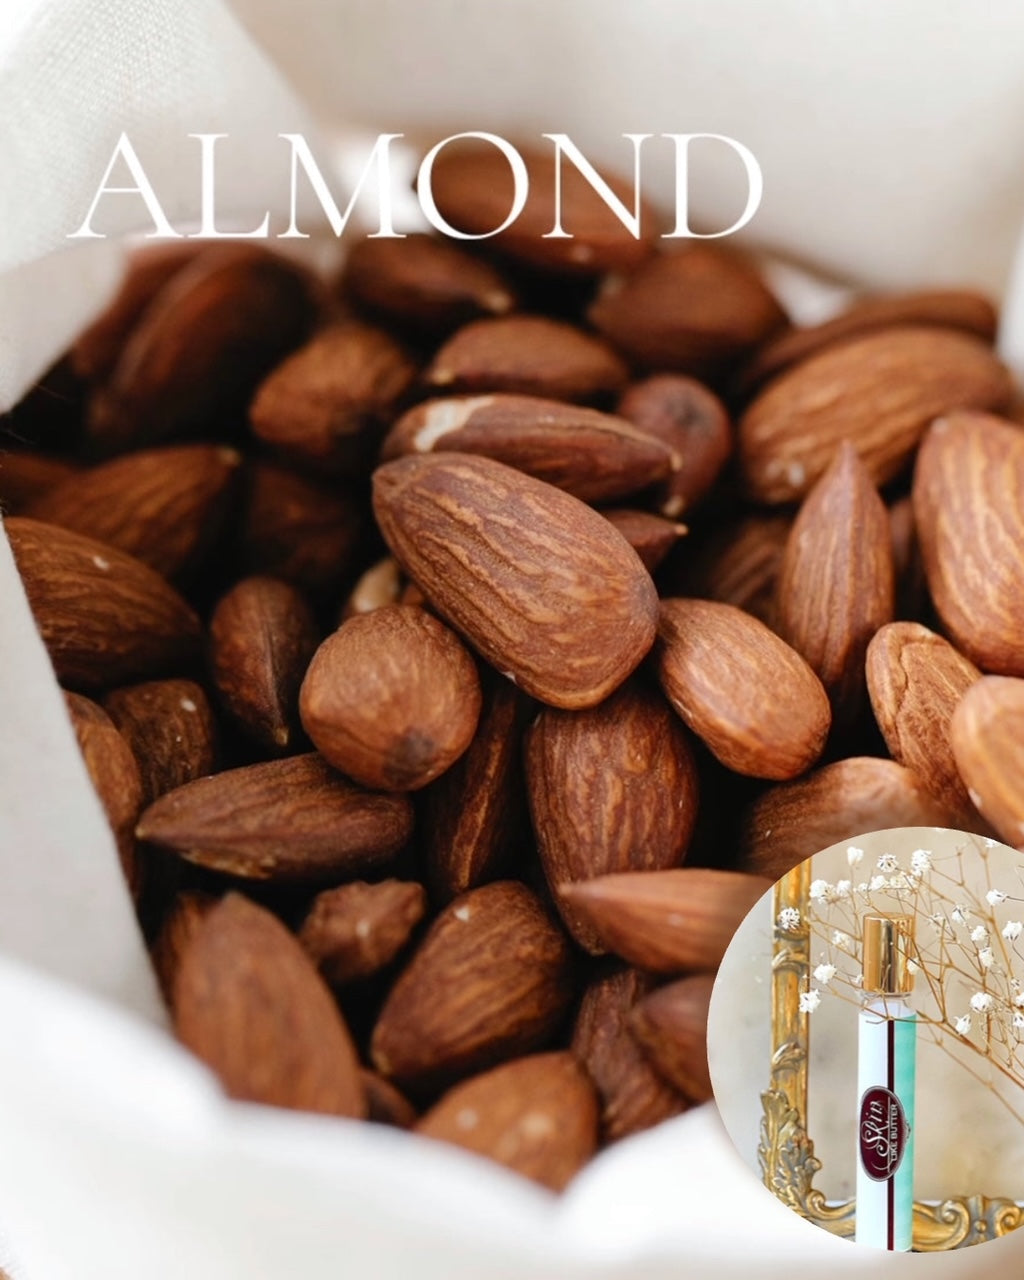 ALMOND Roll On Travel Perfume in a Roll on or Spray bottle - Buy 1 get 1 50% off-use coupon code 2PLEASE